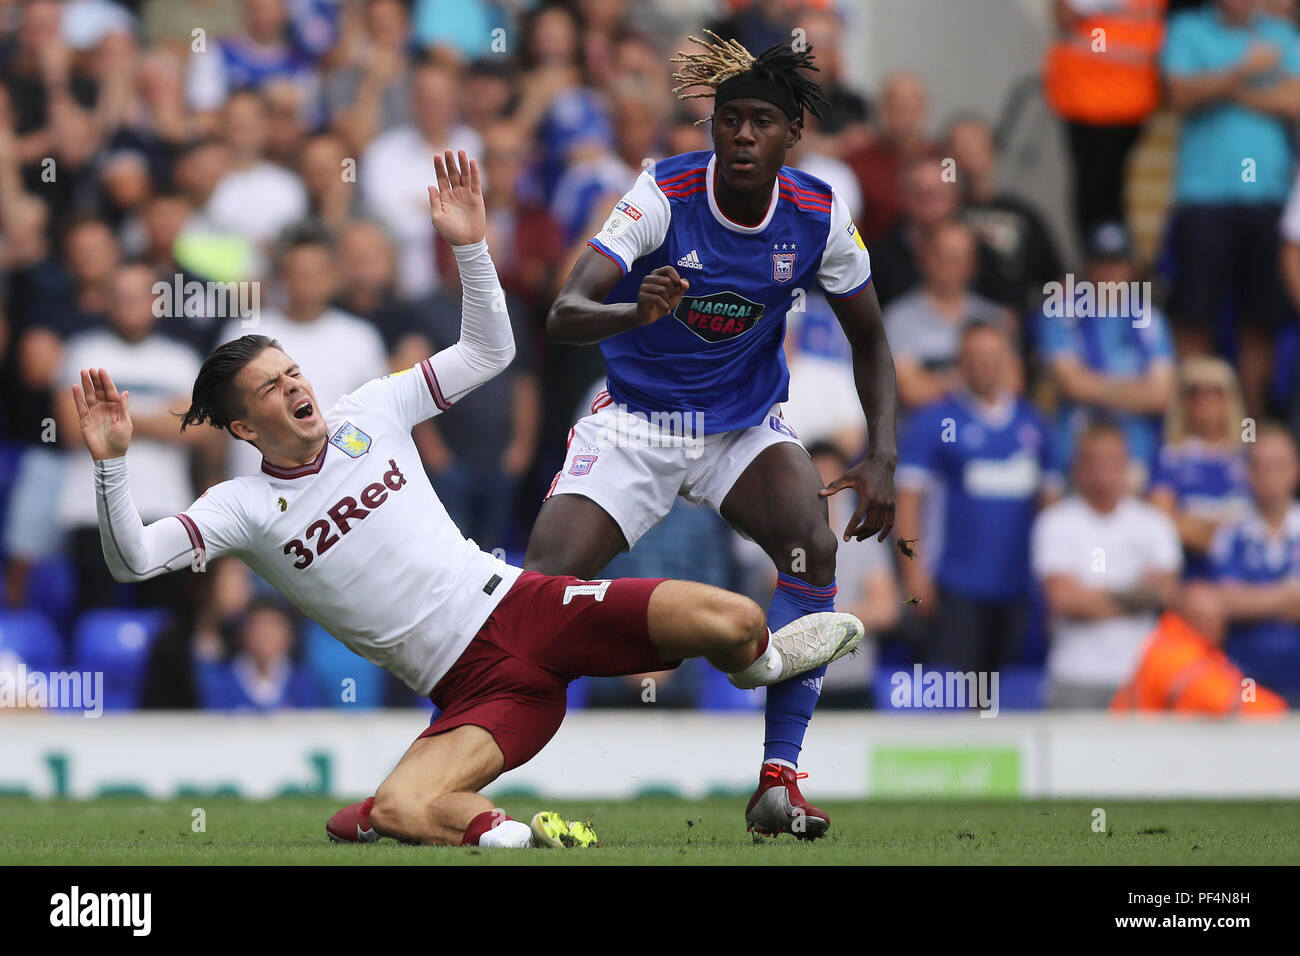 Ipswich, UK.. 18th Aug, 2018. Jack Grealish of Aston Villa goes to ground after a challenge from Trevoh Chalobah of Ipswich Town - Ipswich Town v Aston Villa, Sky Bet Championship, Portman Road, Ipswich - 18th August 2018 Credit: Richard Calver/Alamy Live News Stock Photo